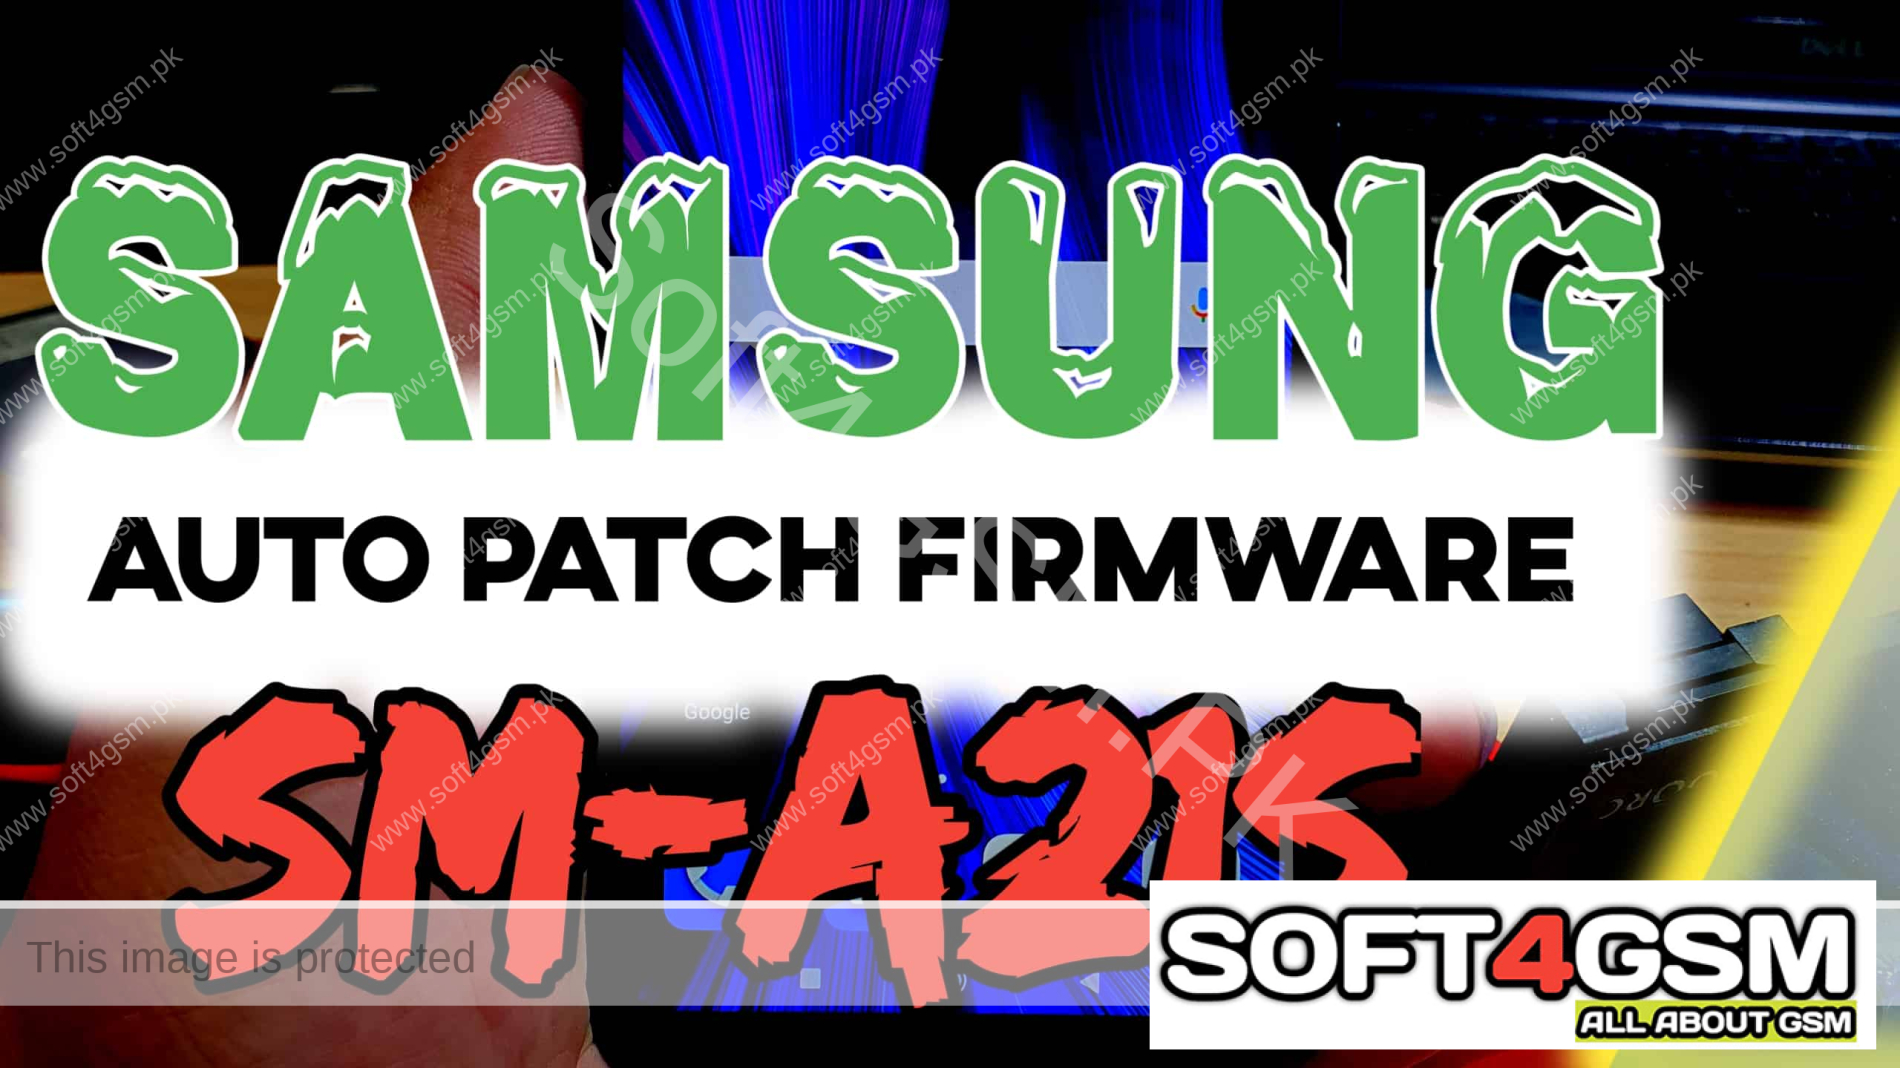 samsung a21s root android 10,root samsung a21s android 10,how to root android 11,samsung a217f root,android 11,how to root samsung a217f,a217f root u6 android 11,root samsung a217f,root method samsung a217f,a217f root 2021,samsung a217f root u5,a217f root,samsung a217f root u2,samsung a217f root u3,a217f,a21s,root,u6,a217f u6 root,a21s u6 root,a217f u6 binary u6 root,a21s binary u6 root,a21s android 11 root,a217f android 11 root,u7,auto patch samsung